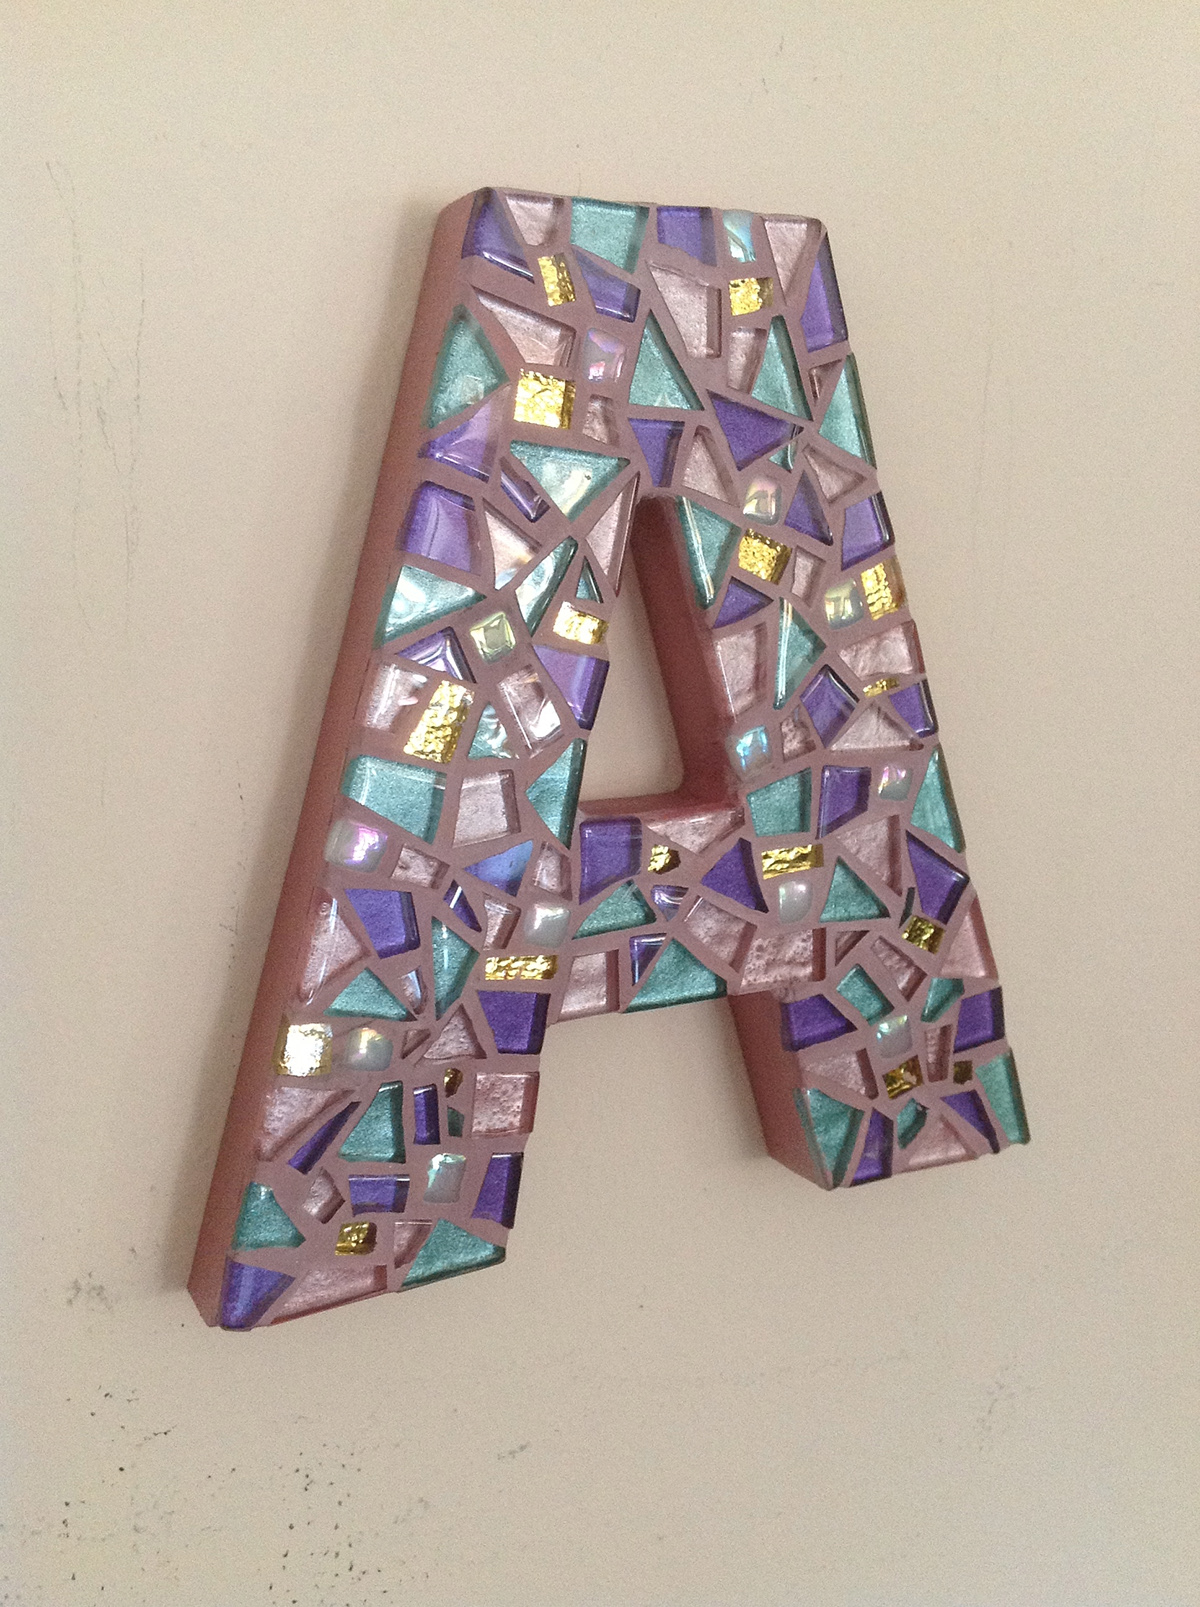 mosaics  initials  Monograms  hand made  artisan  mosaic letters custom made mosaic stained glass  mirror